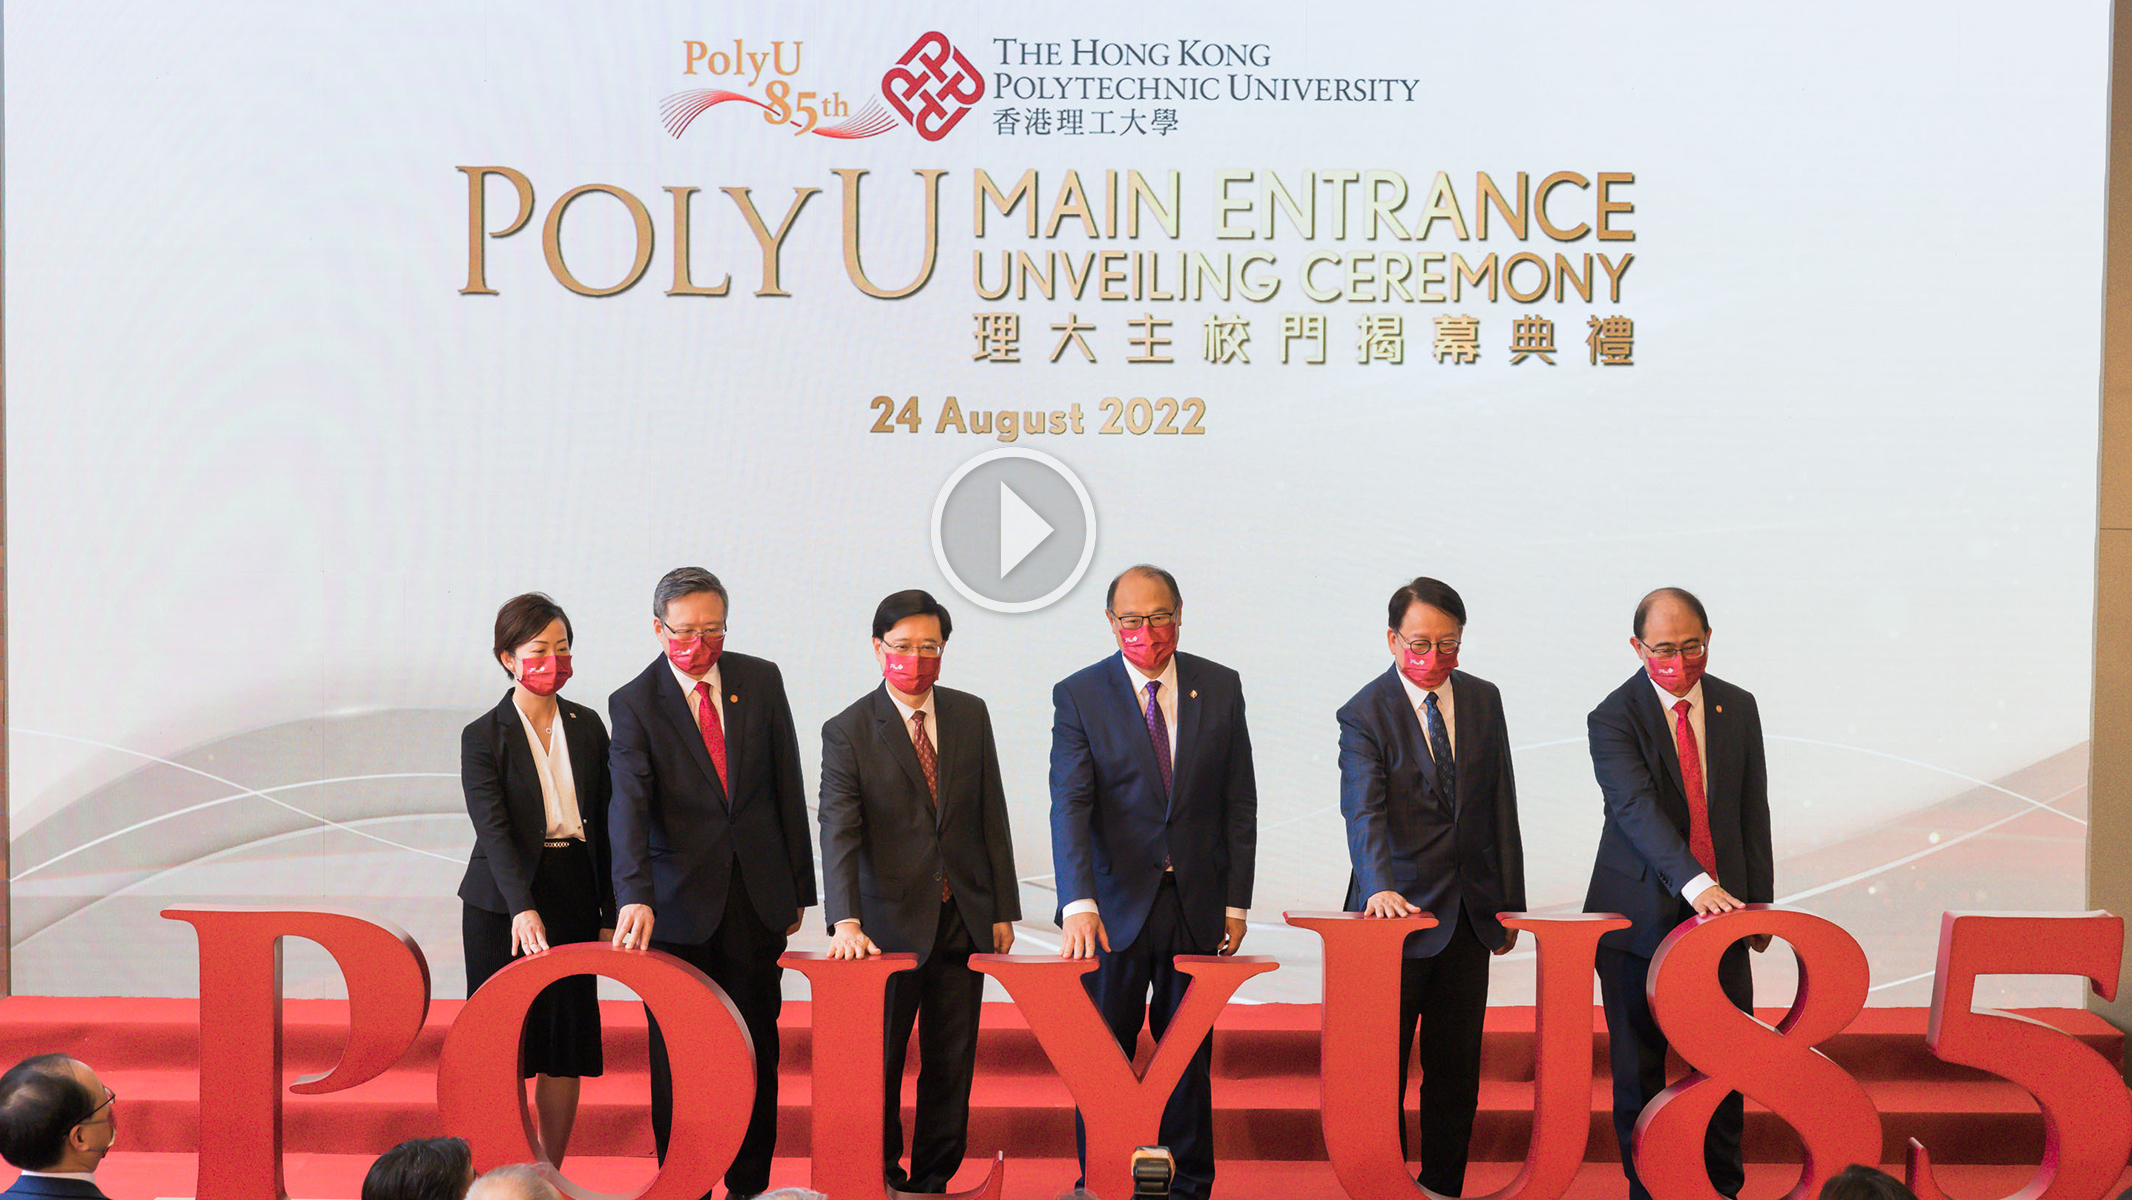 A new chapter for PolyU with the unveiling of the Main Entrance